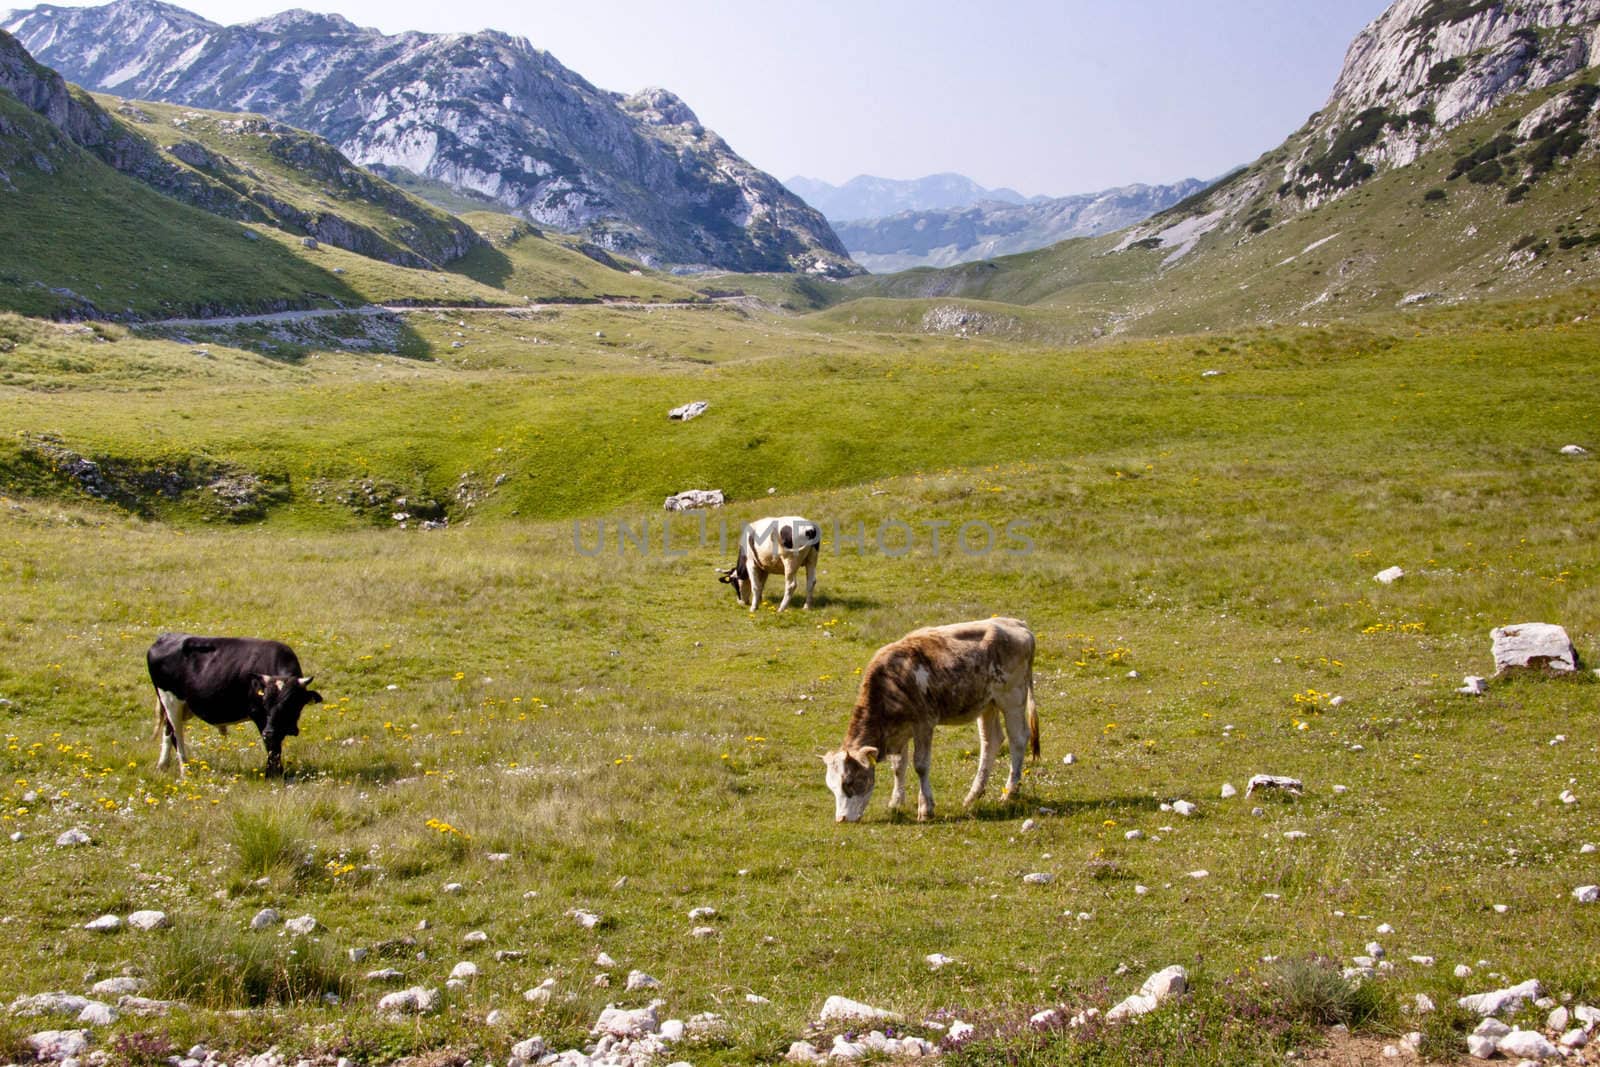 Cows on mountains meadow in National Park Durmitor - Montenegro.